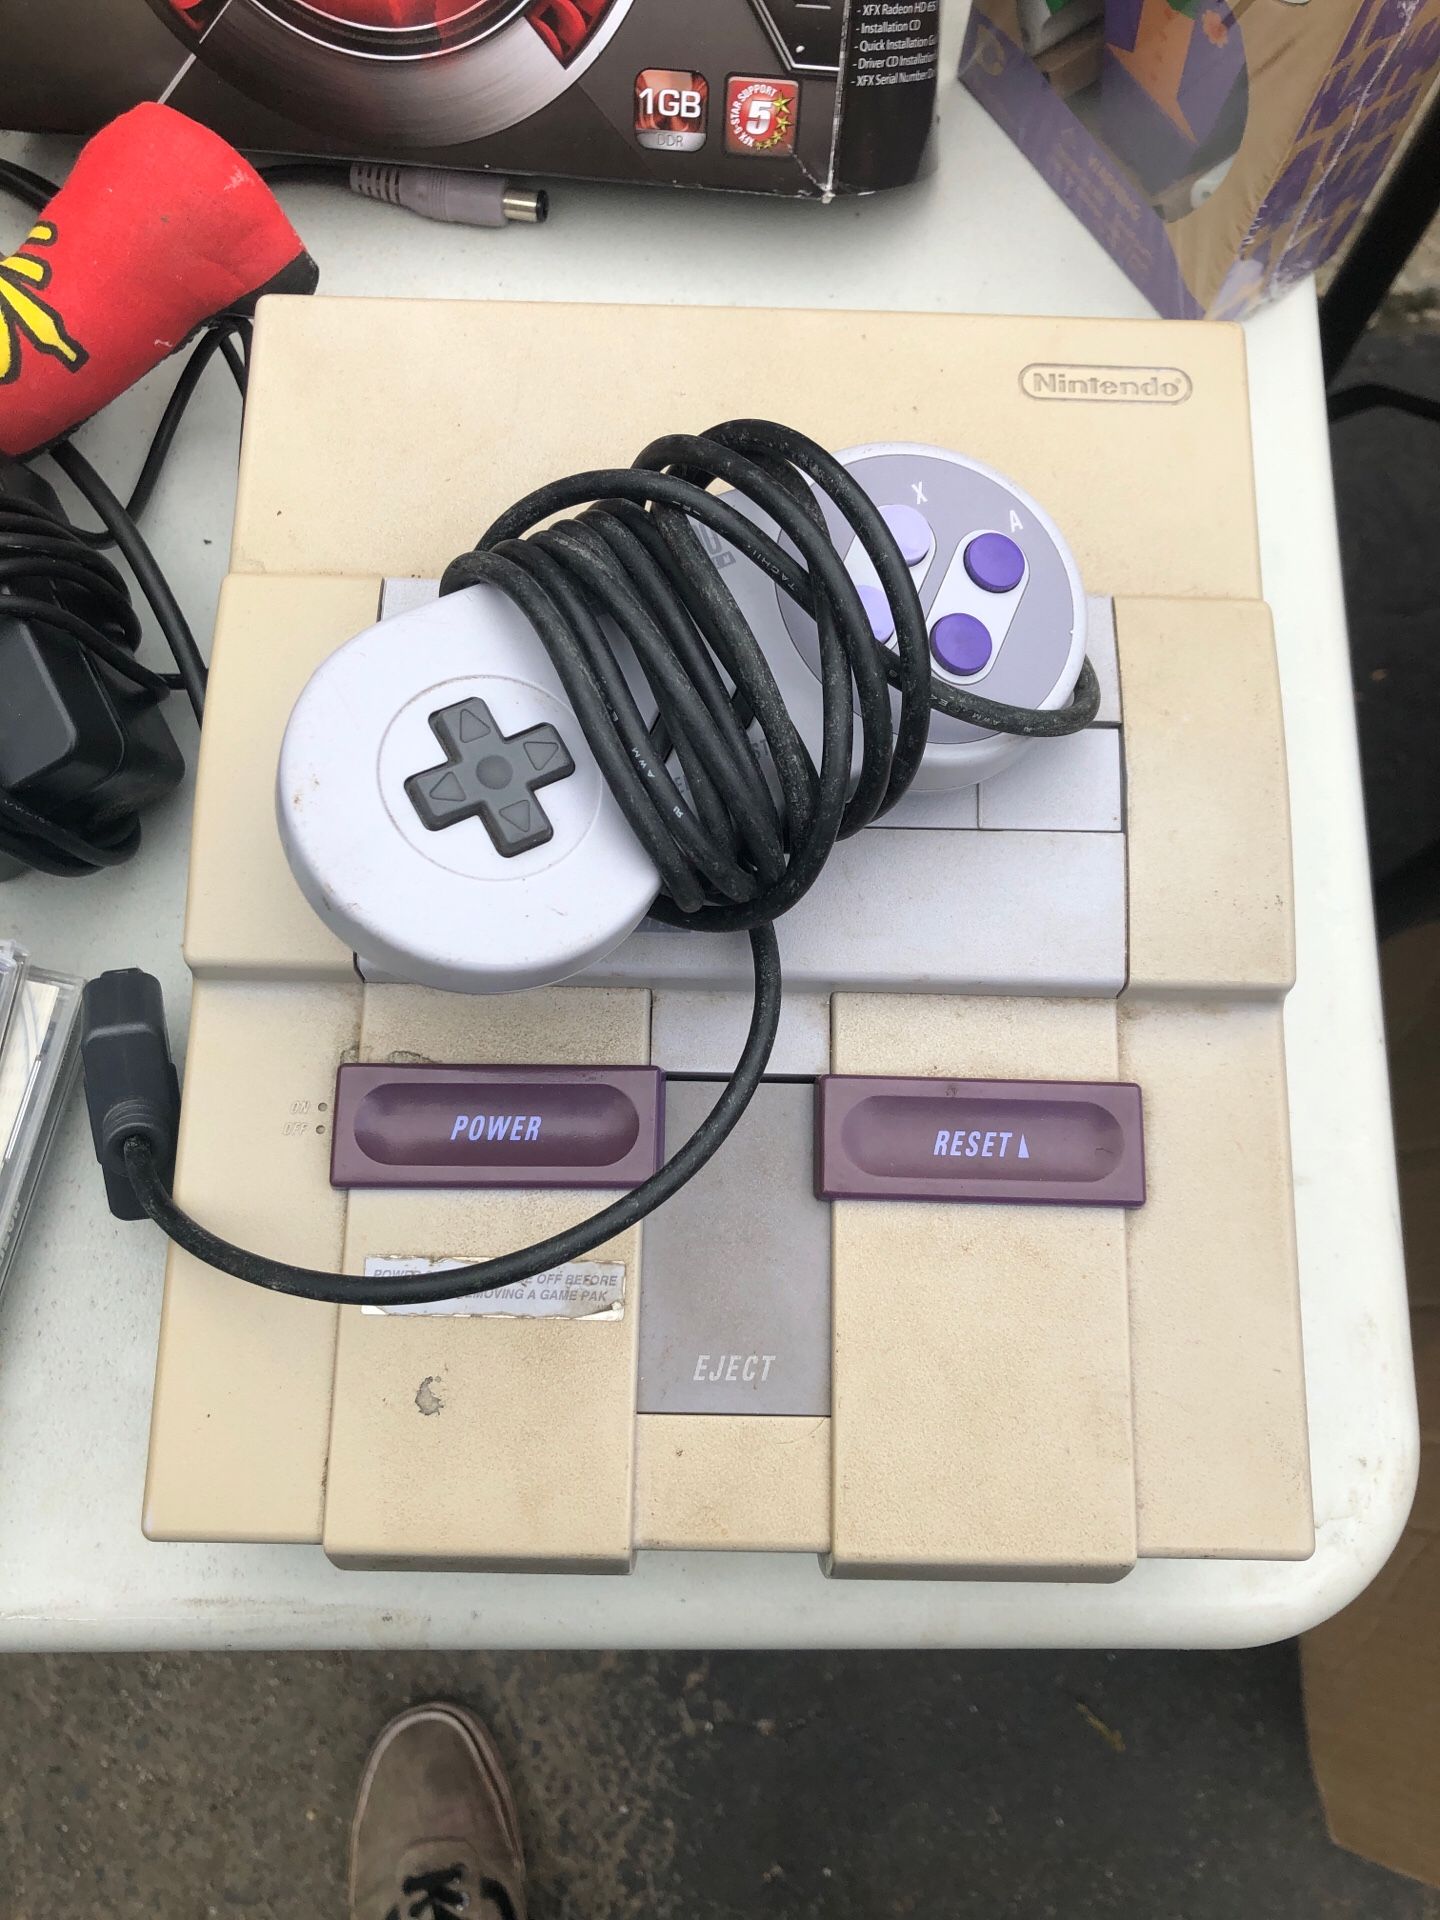 Super Nintendo (SNES) working with one controller and wires